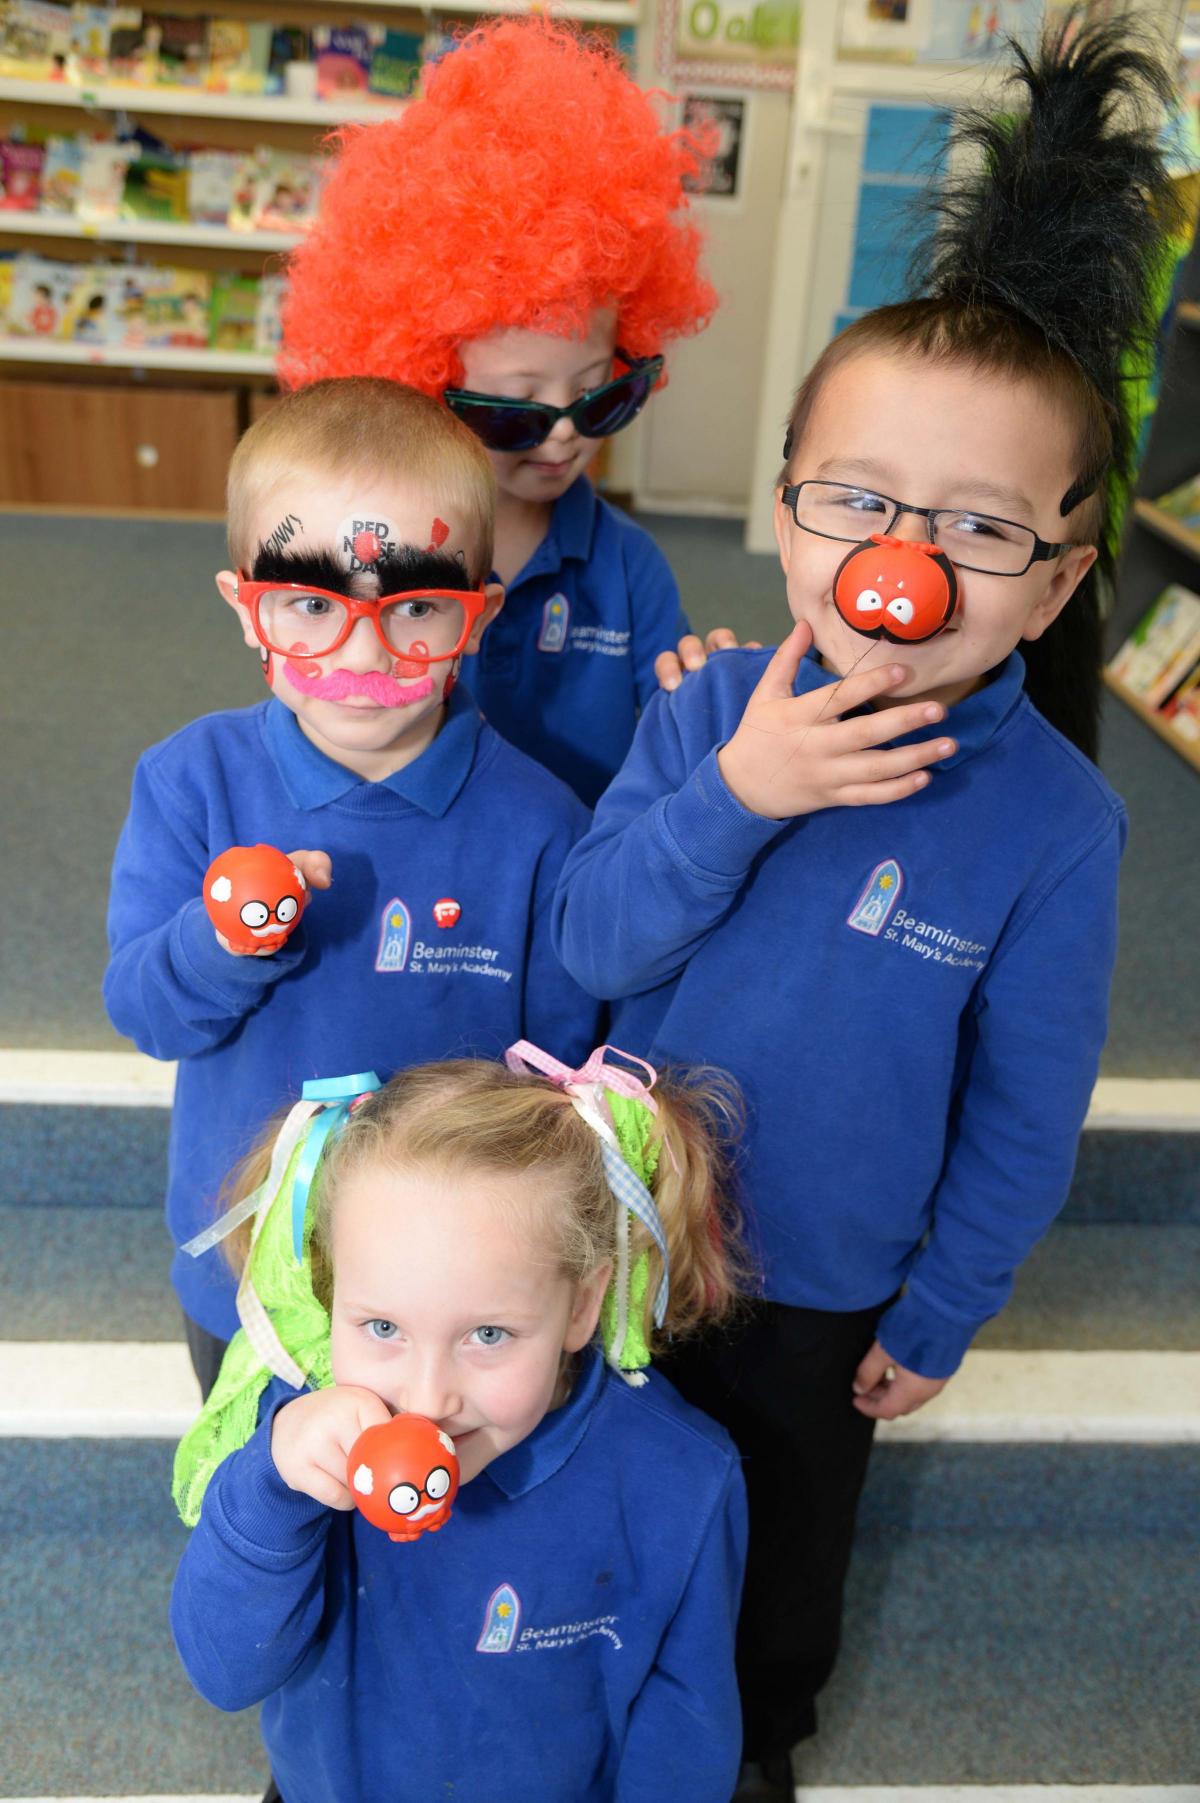 Red Nose Day 2015